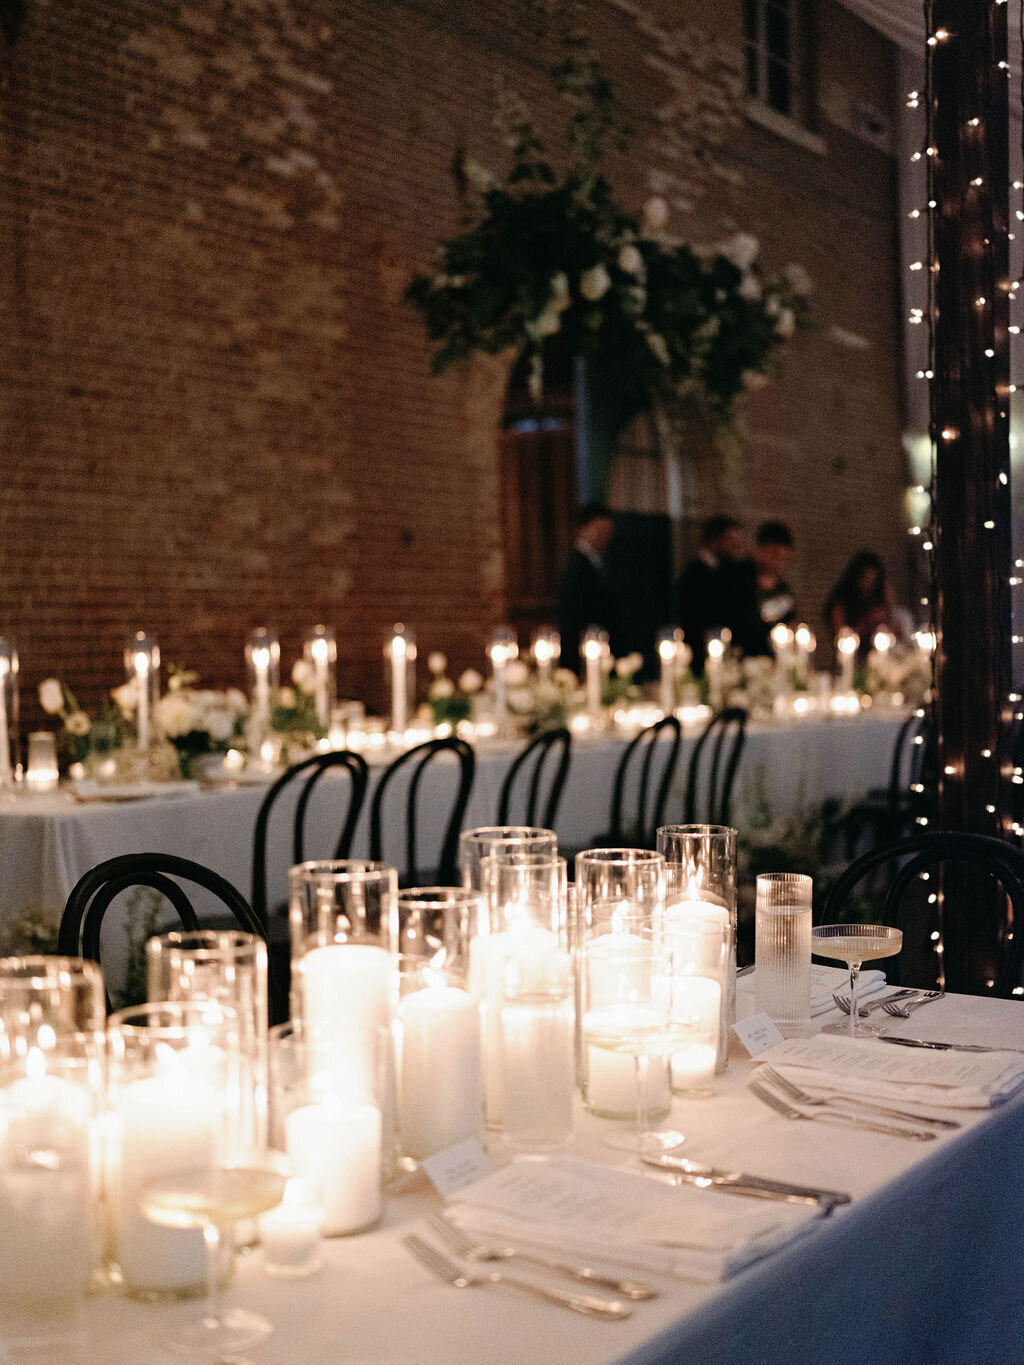 Long guest tables at the receptions at the Evergreen Museum Carriage House with an abundance of ivory pillar candles and hanging installation over the head table.